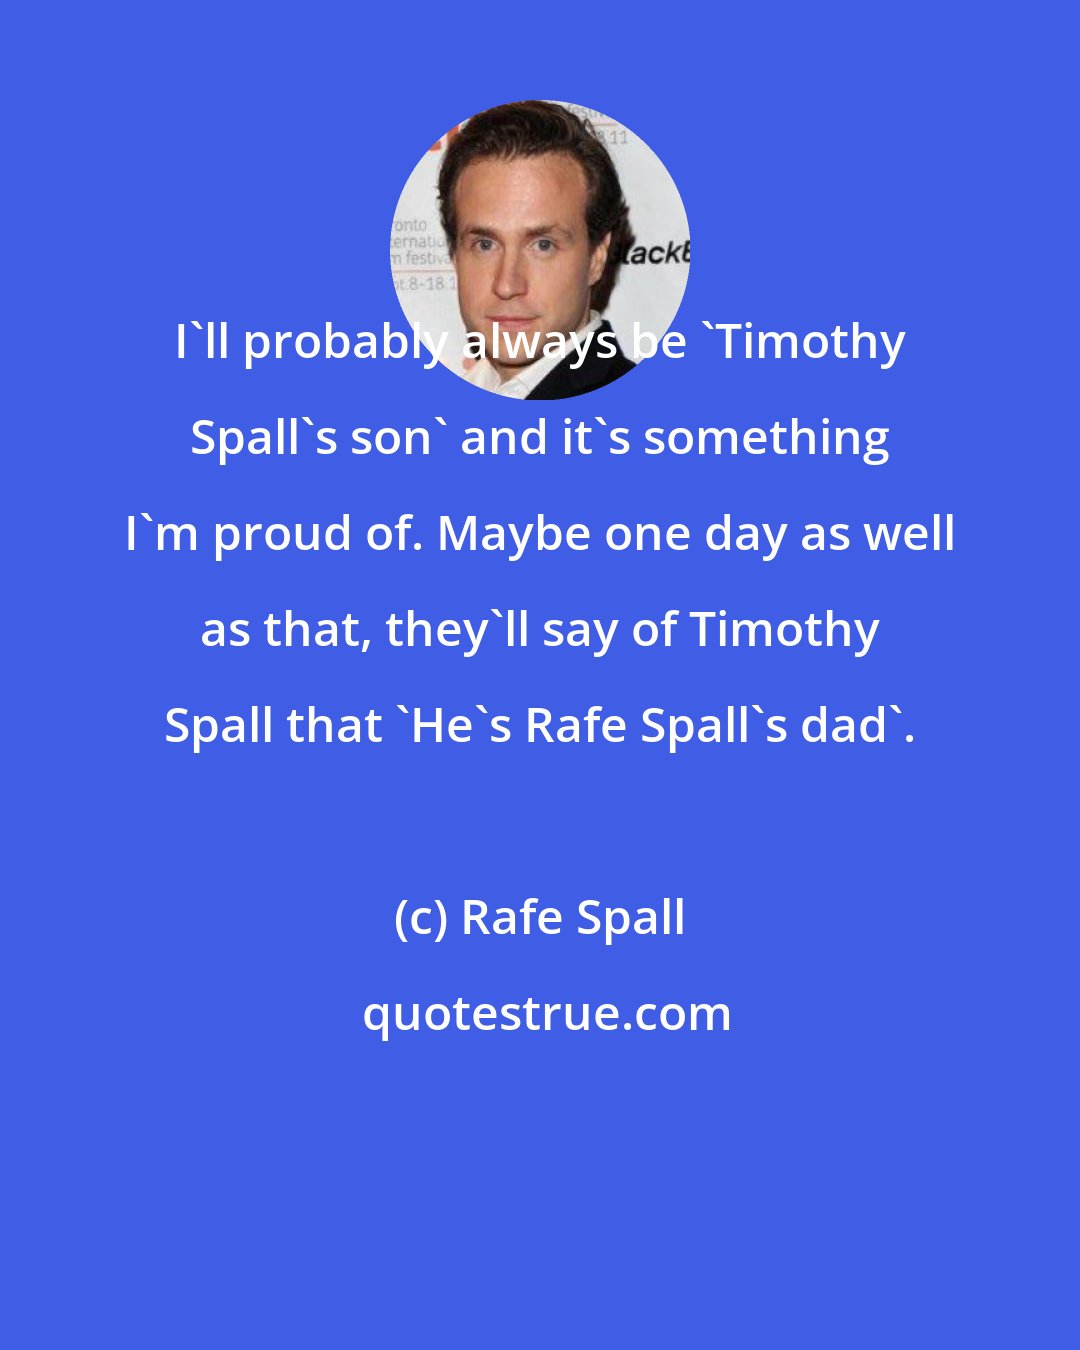 Rafe Spall: I'll probably always be 'Timothy Spall's son' and it's something I'm proud of. Maybe one day as well as that, they'll say of Timothy Spall that 'He's Rafe Spall's dad'.